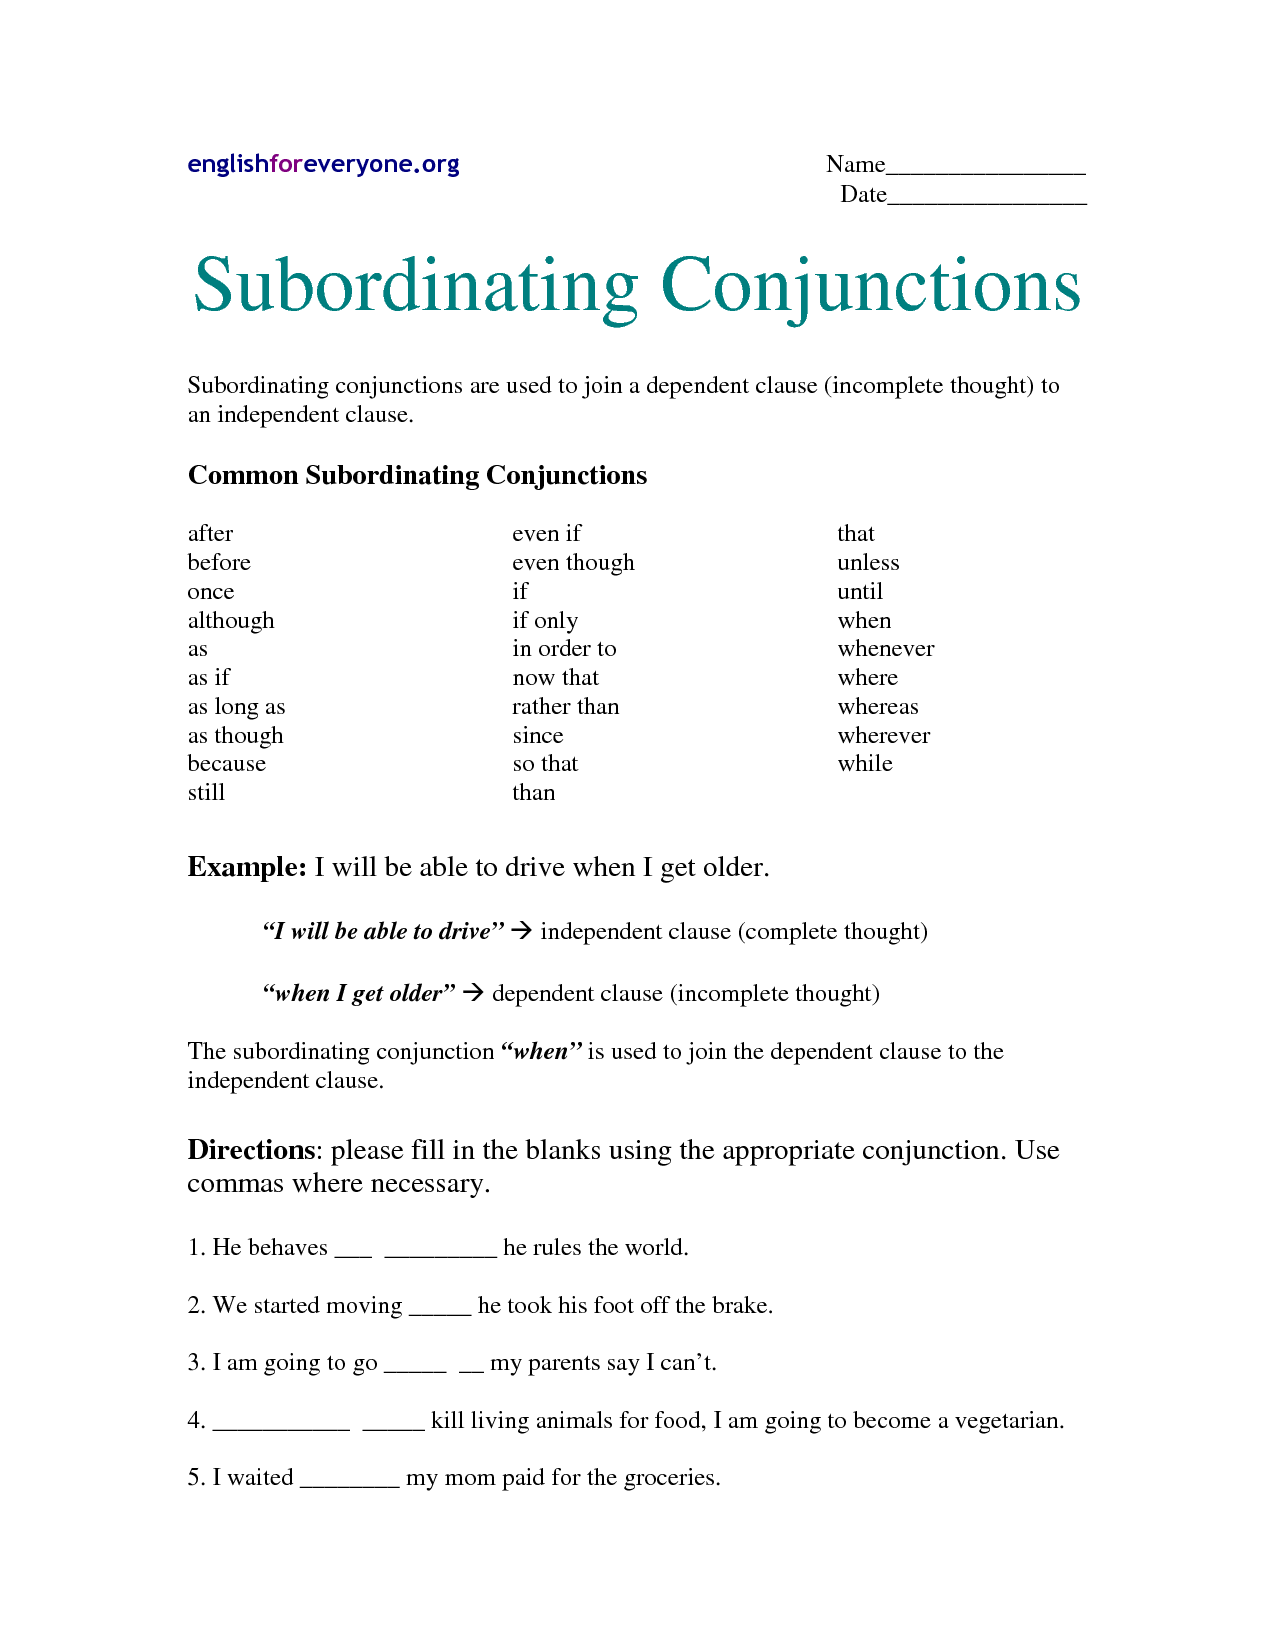 15-best-images-of-worksheets-using-conjunctions-subordinating-conjunctions-worksheets